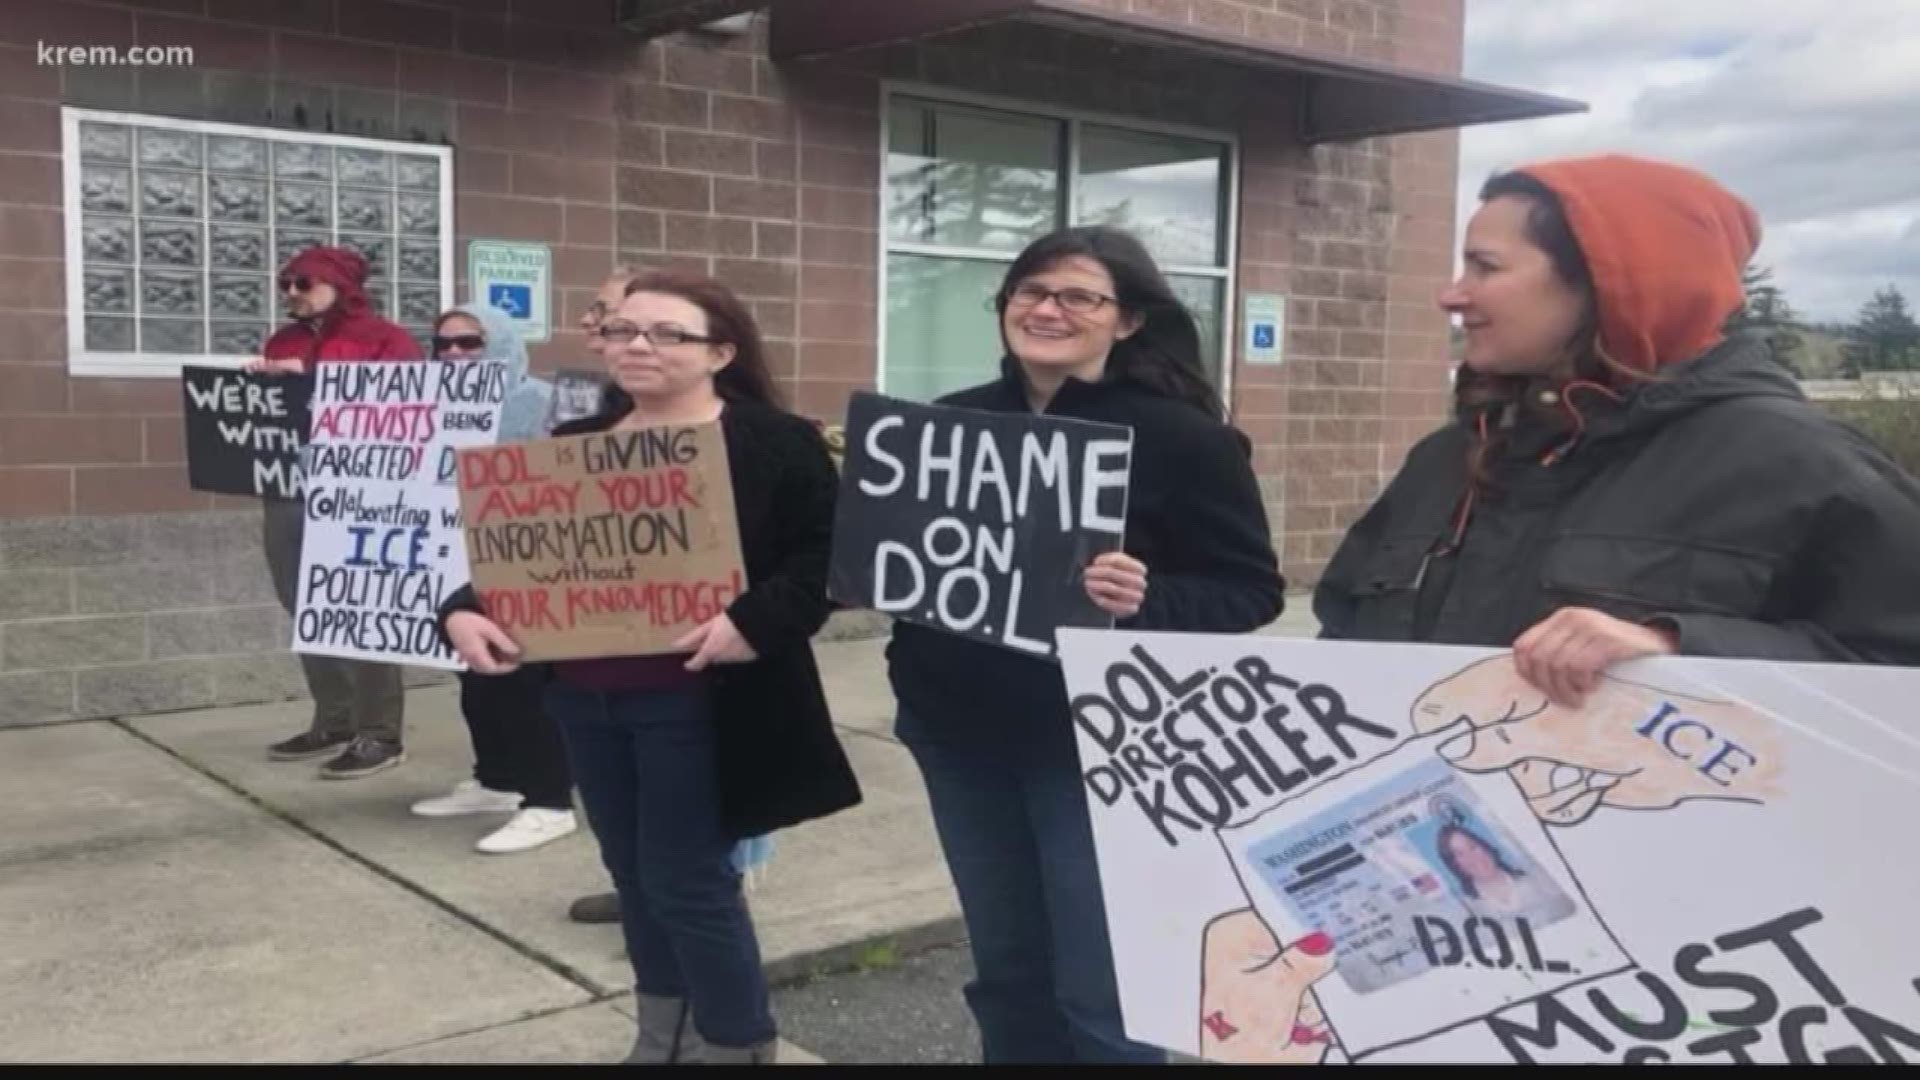 Protesters demand Gov. Inslee to remove Director of Licensing over data scandal